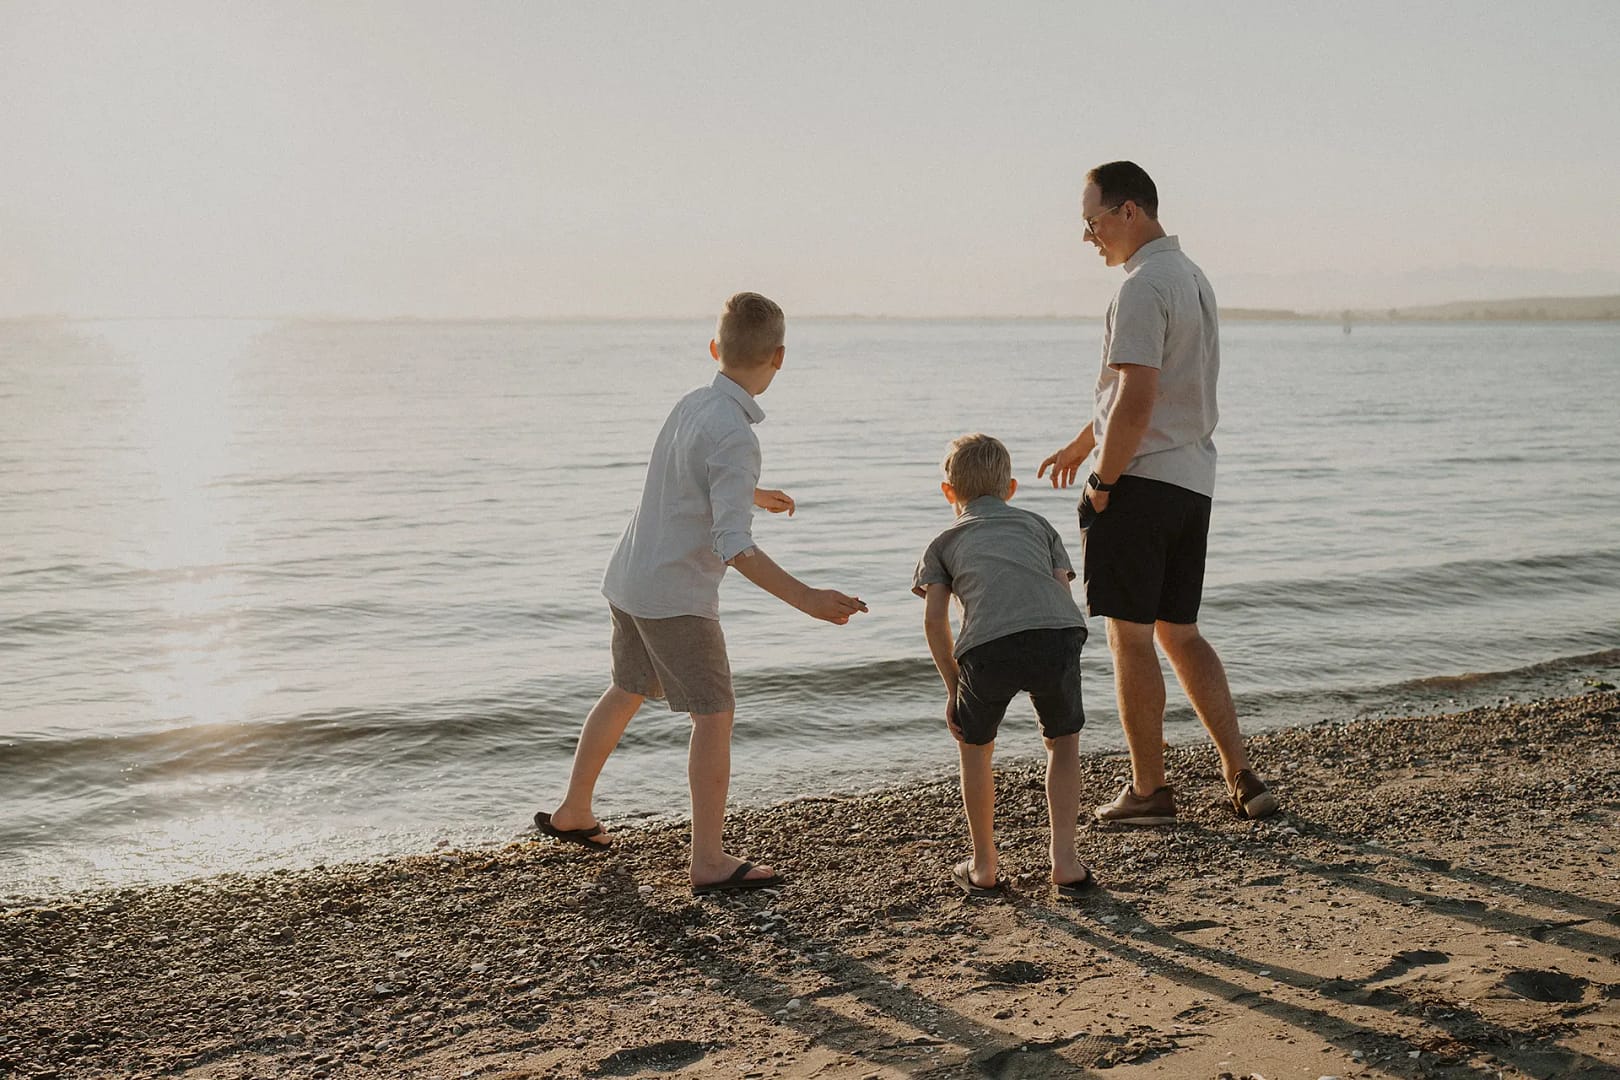 Dad and his two boys skipping rocks in the ocean